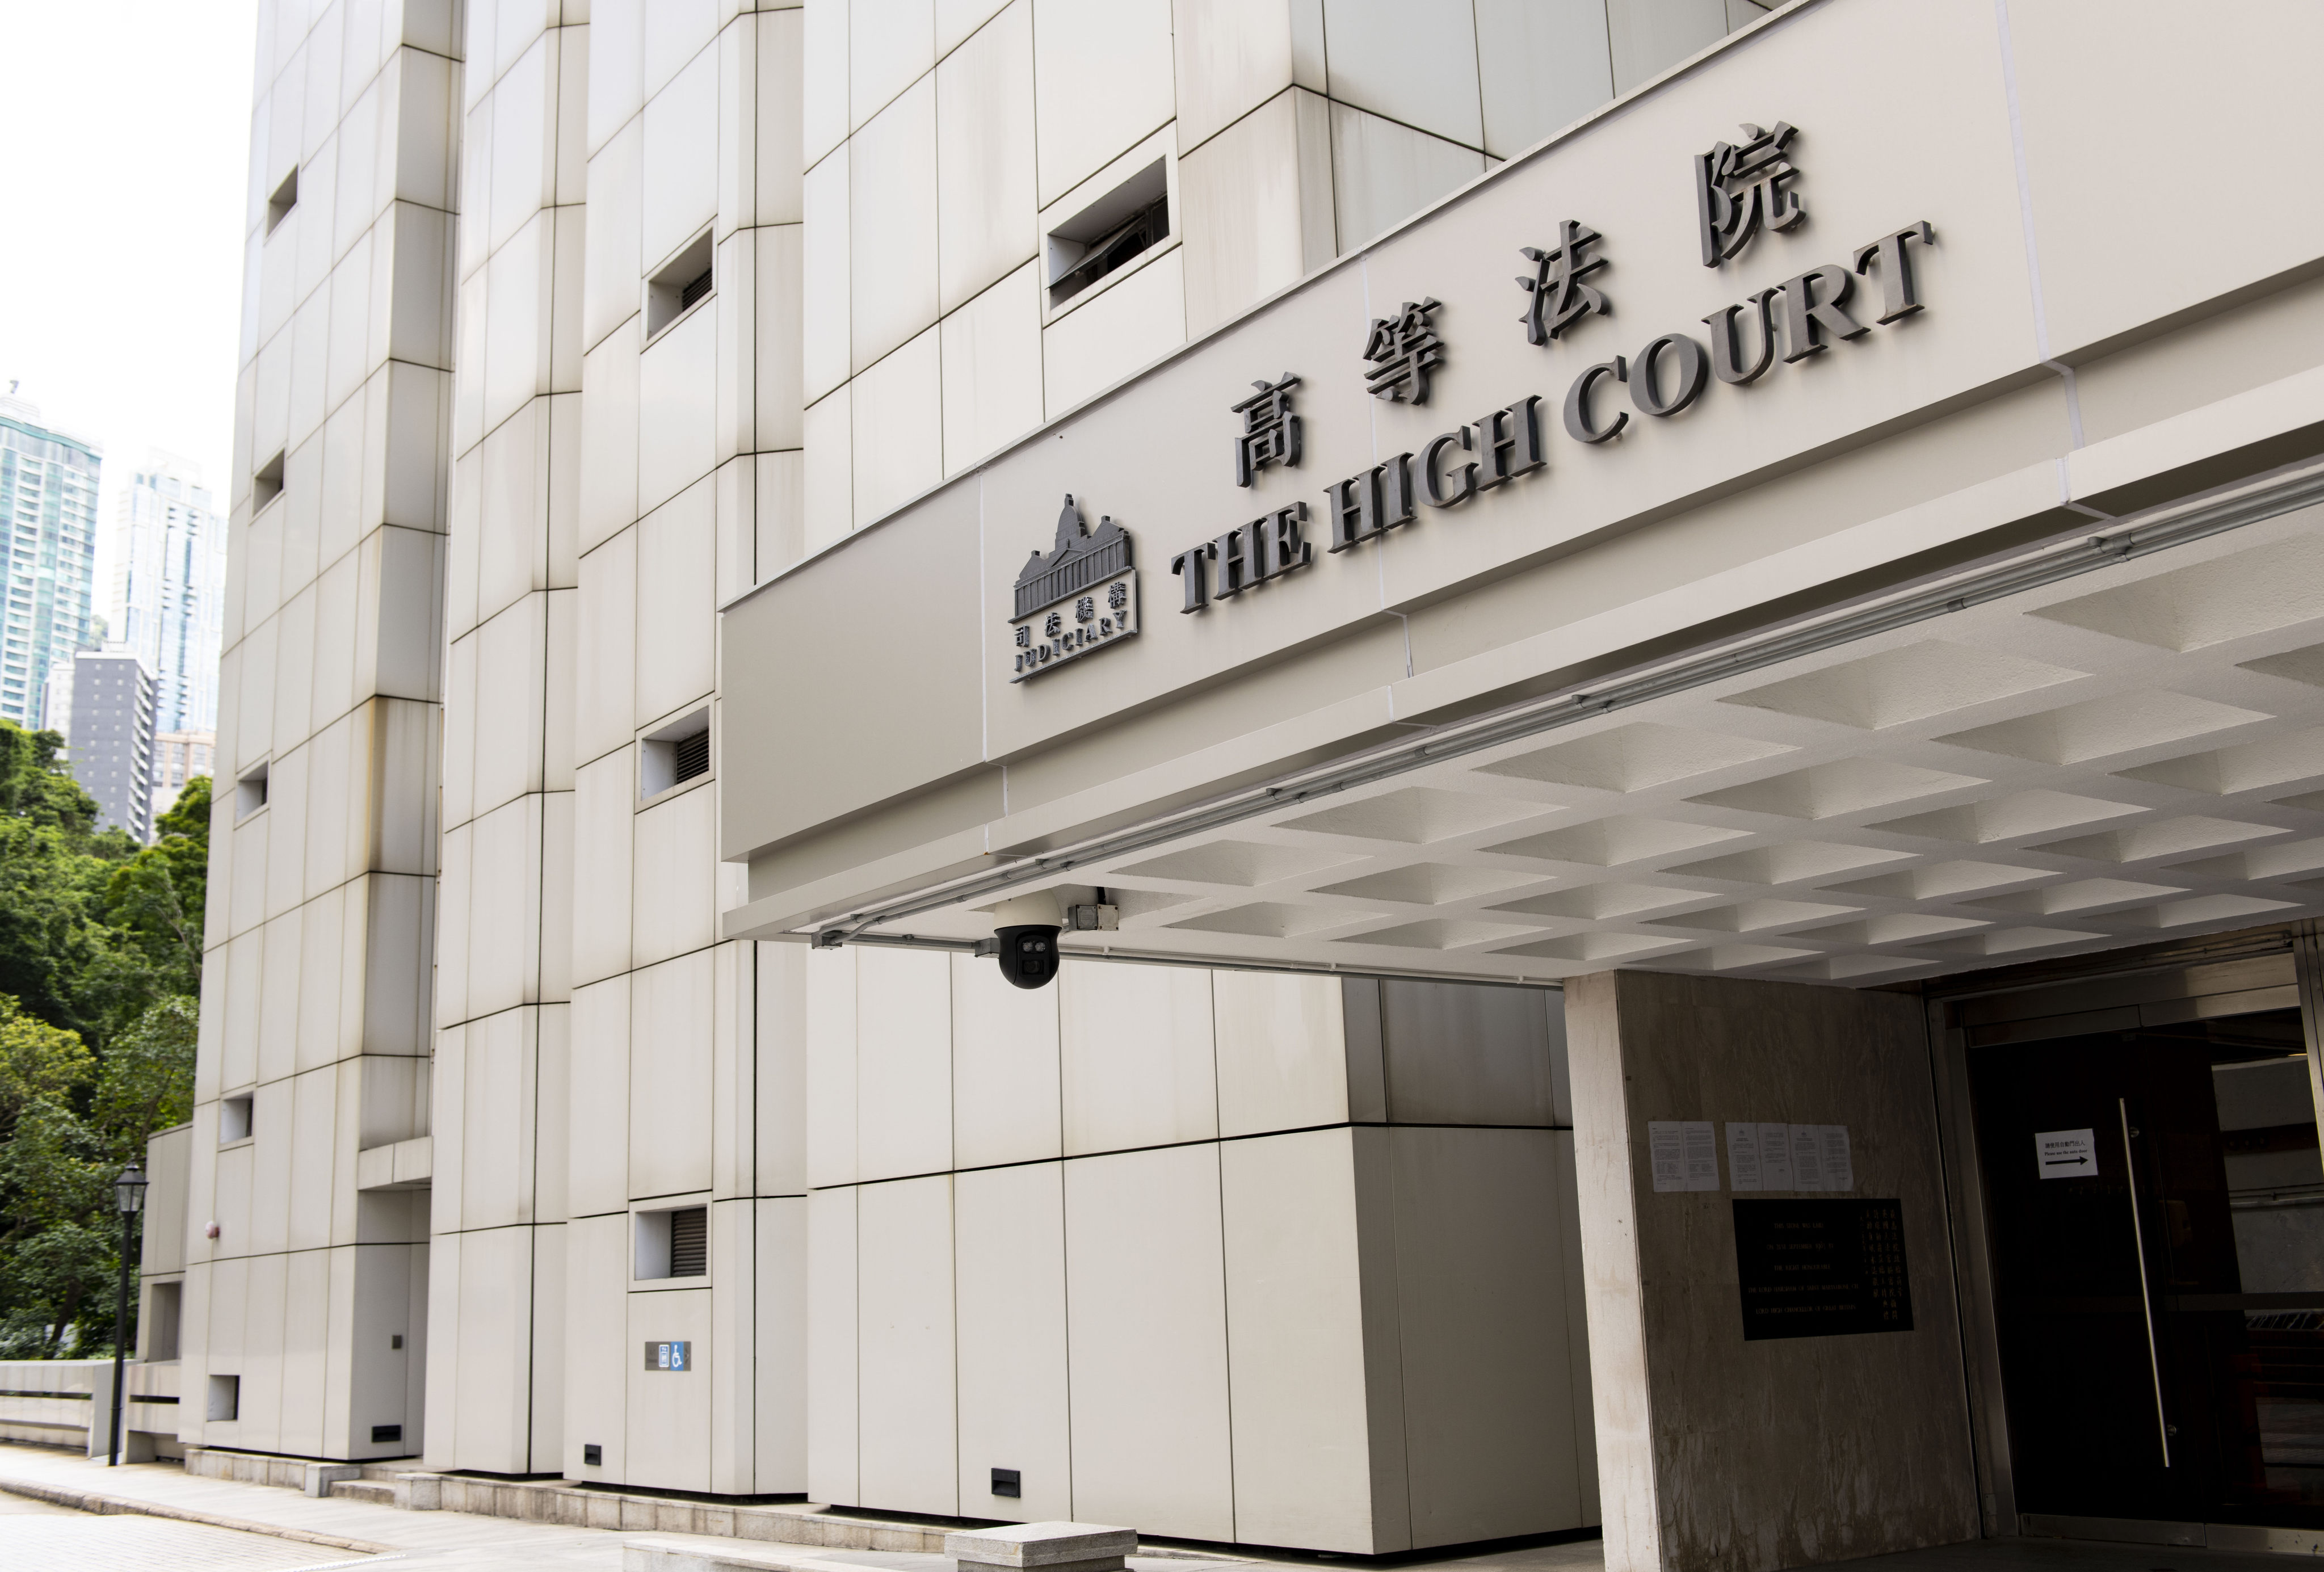 The chief executive will have the final say on the use of overseas counsel in national security cases if legislative amendments are approved. Photo: Warton Li